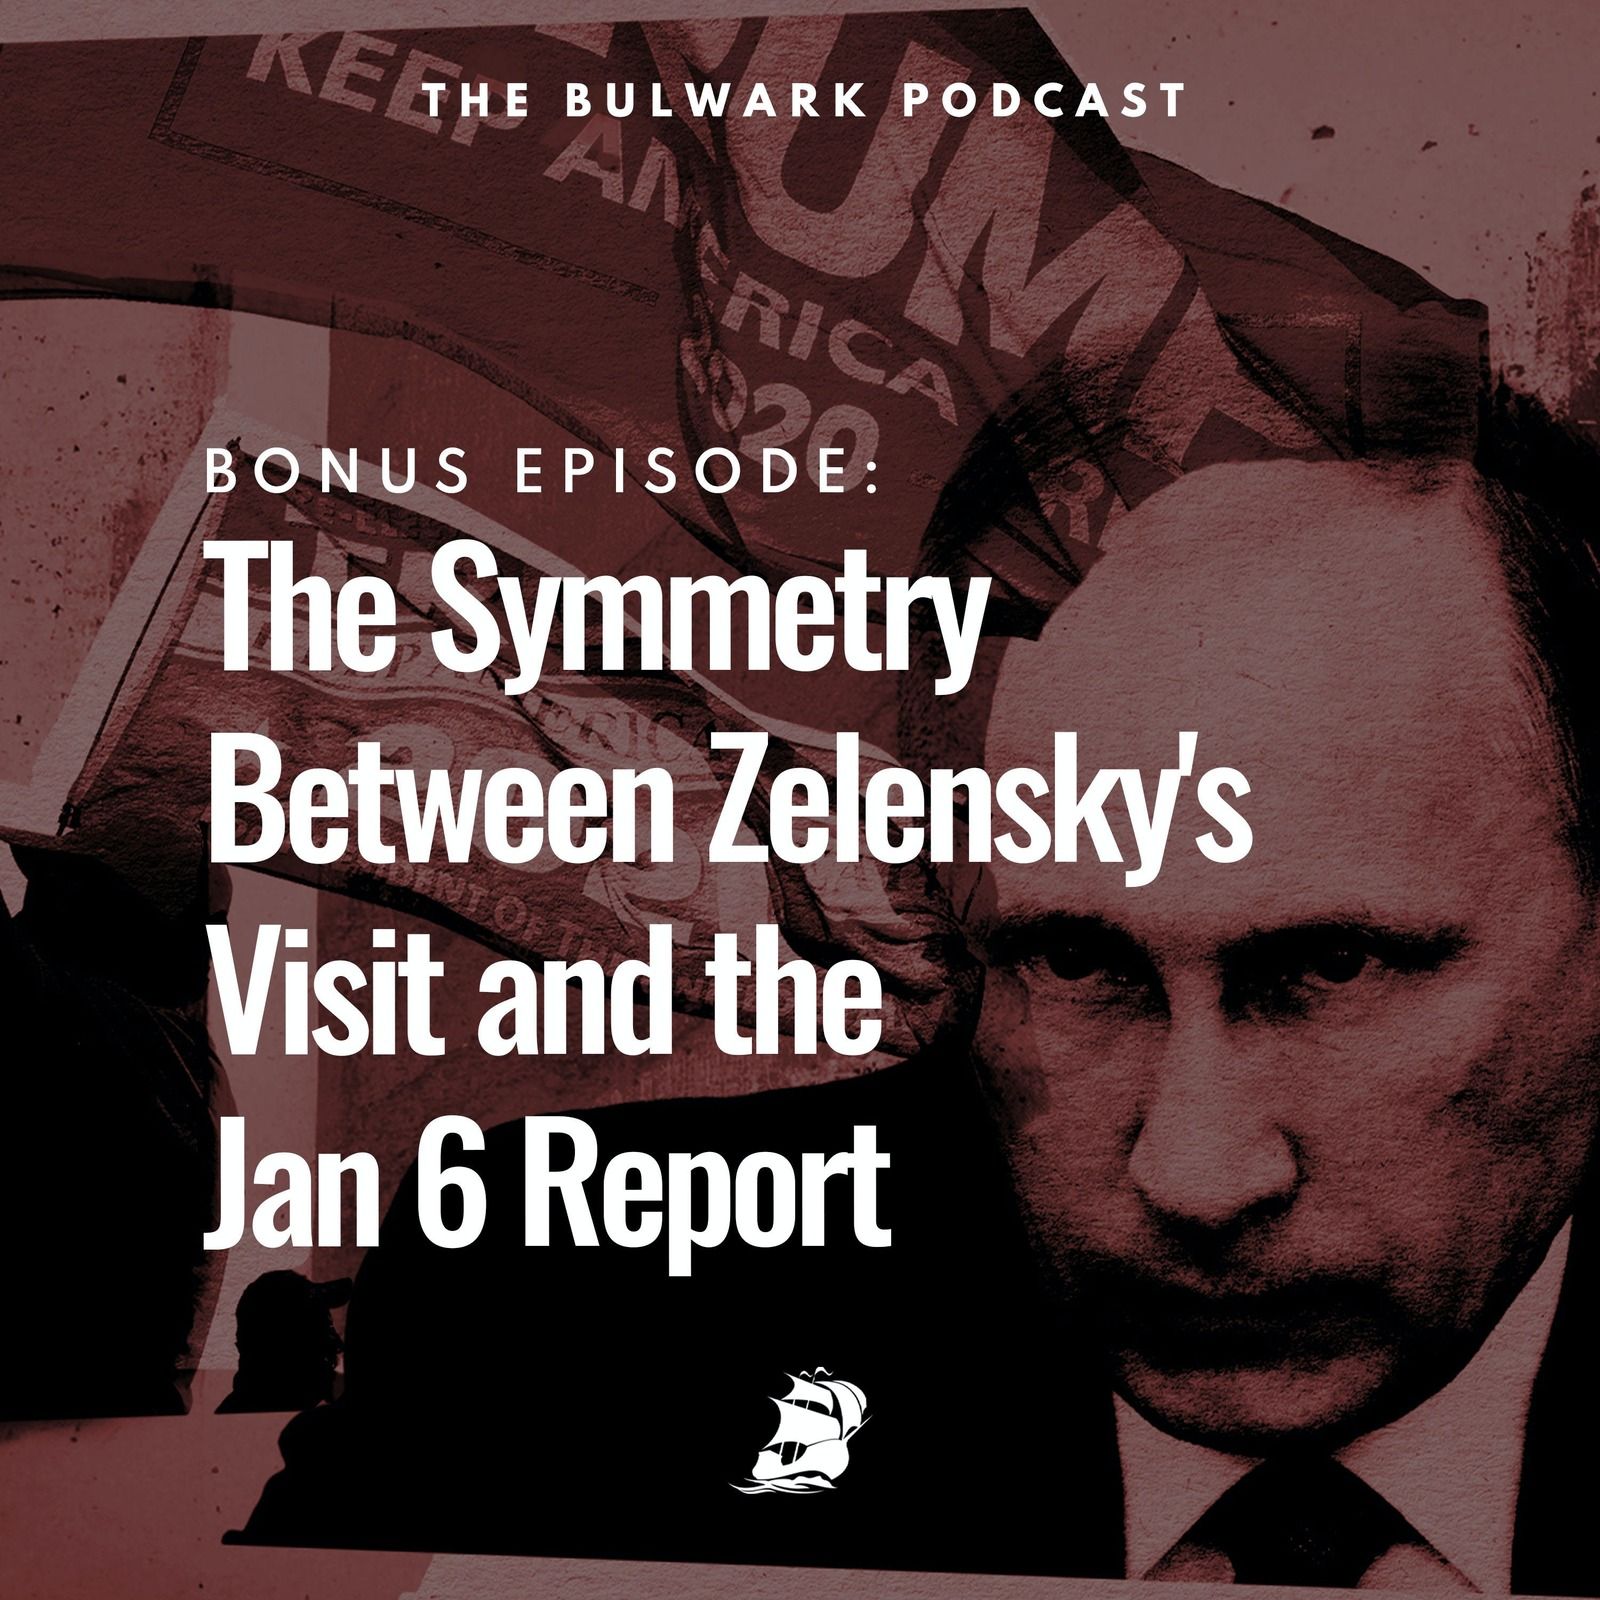 BONUS EPISODE: The Symmetry Between Zelensky's Visit and the Jan 6 Report by The Bulwark Podcast